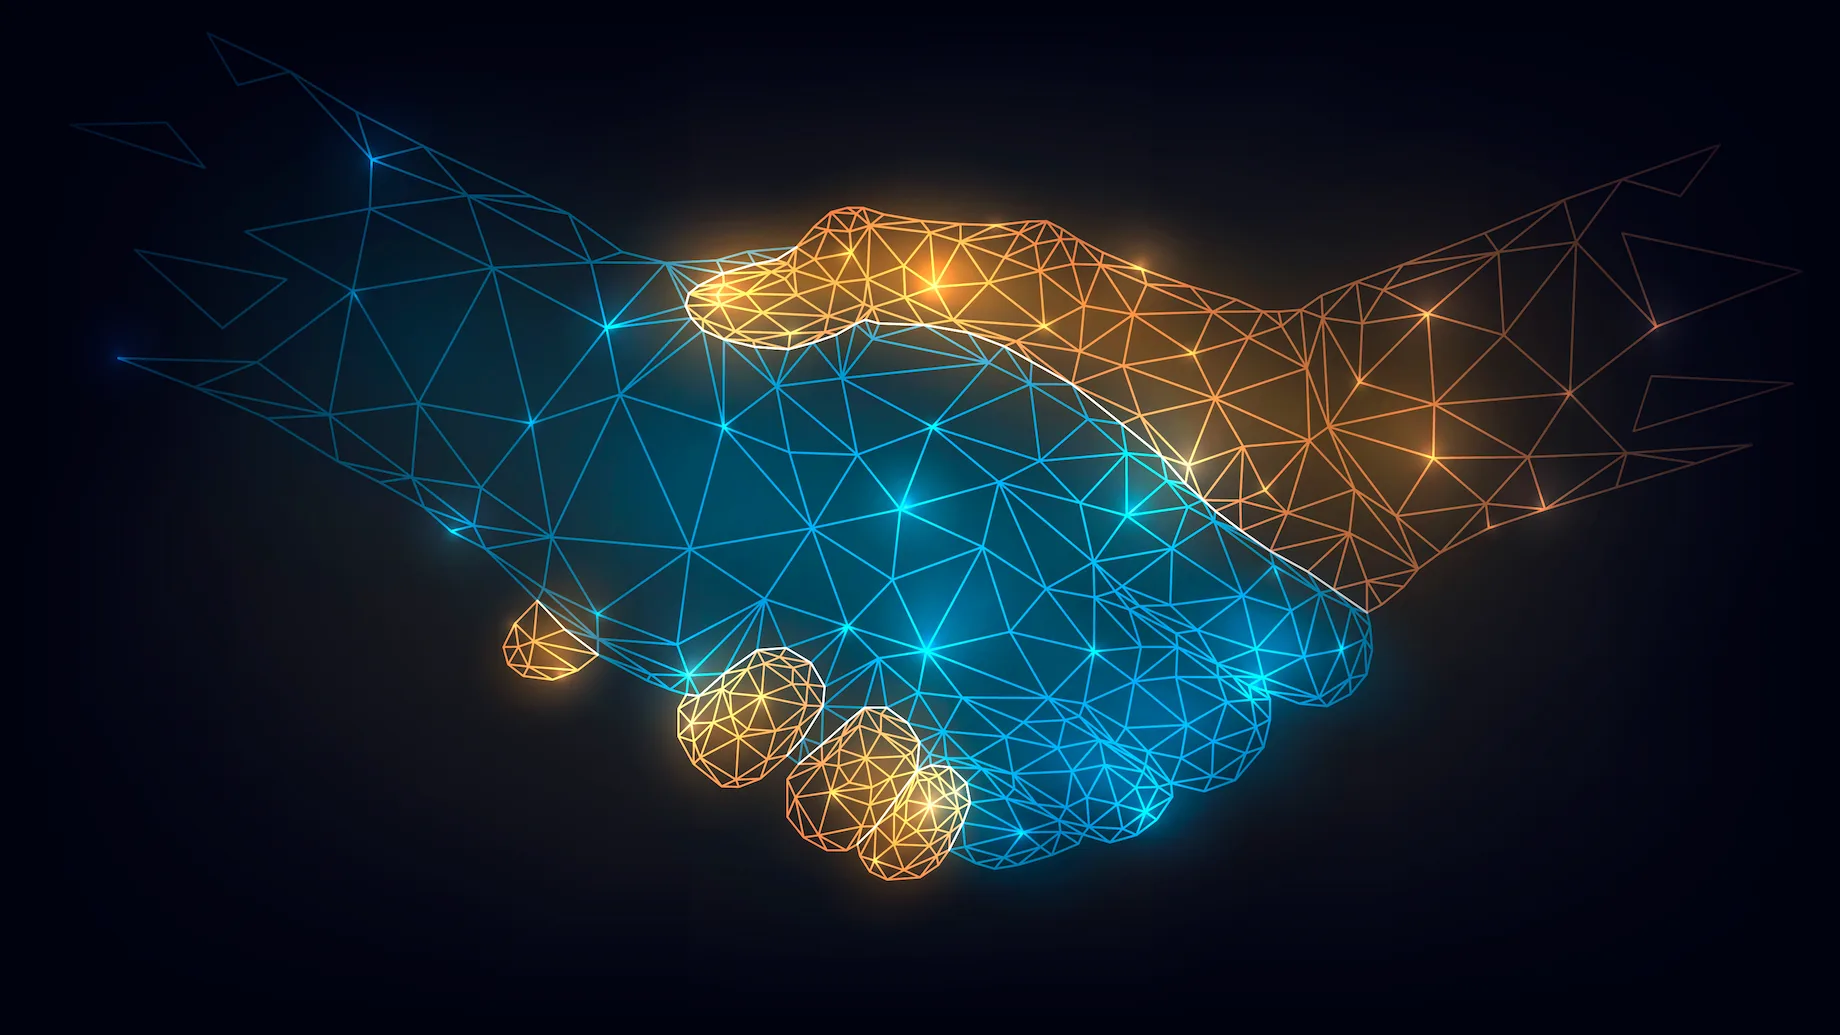 Abstract handshake illustration in glowing network style